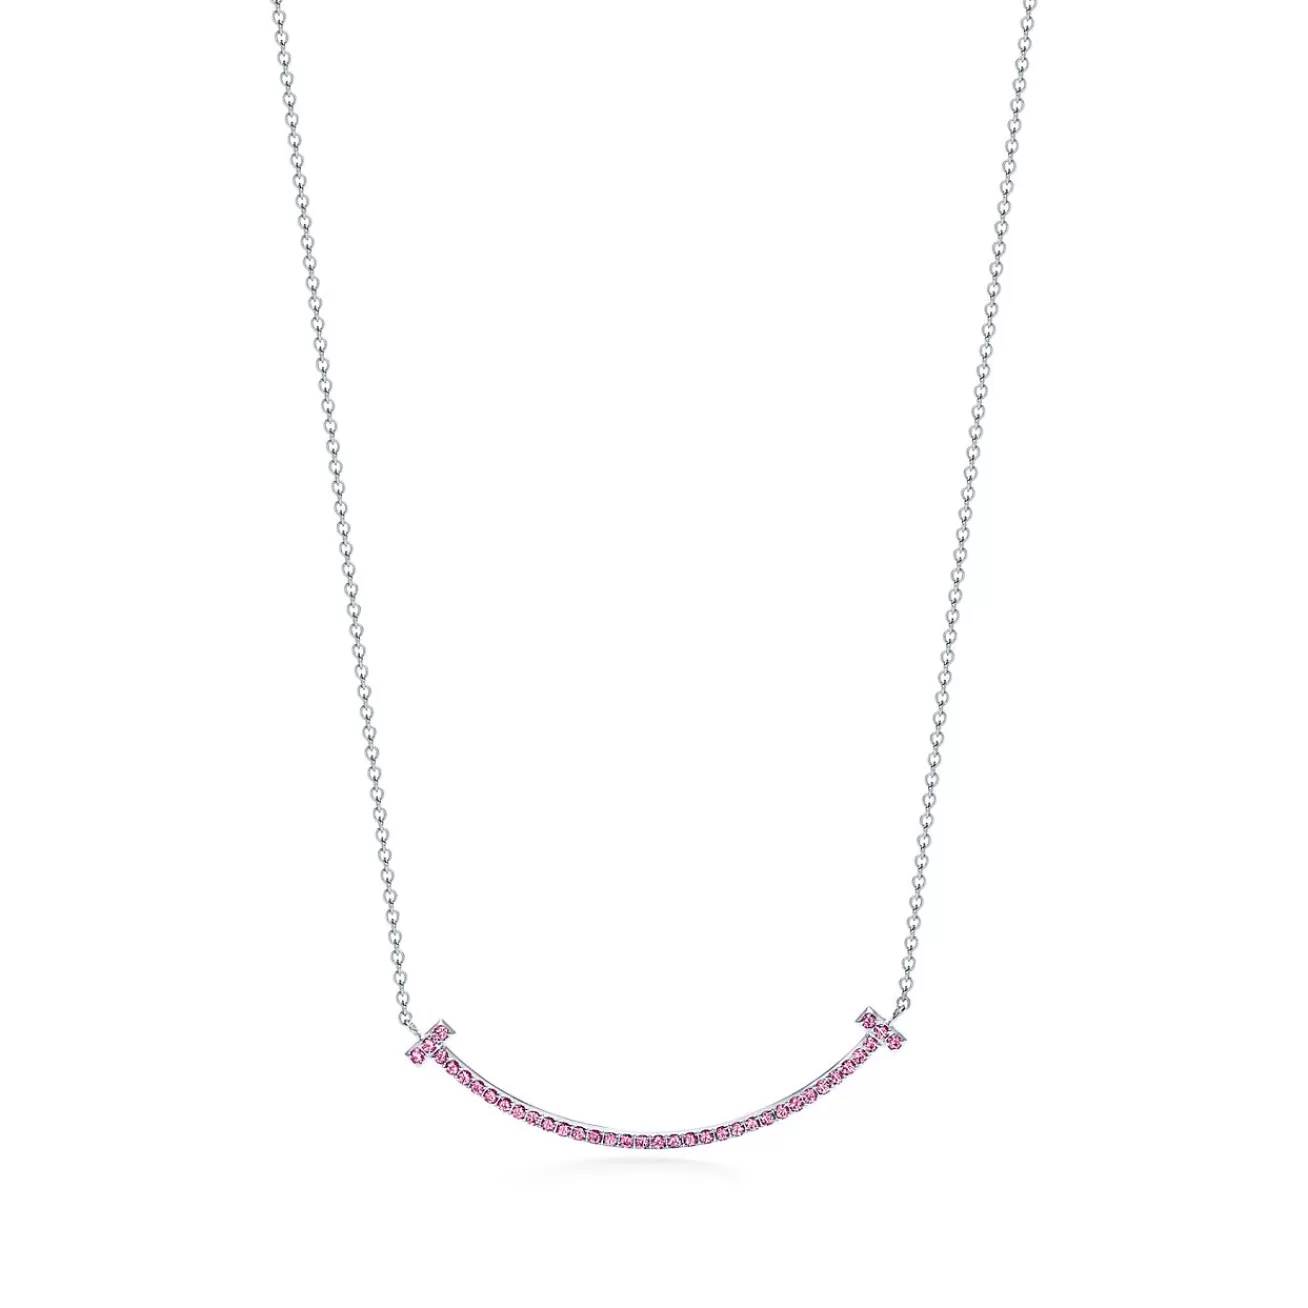 Tiffany & Co. Tiffany T smile pendant in 18k white gold with pink sapphires, small. | ^ Necklaces & Pendants | Colored Gemstone Jewelry